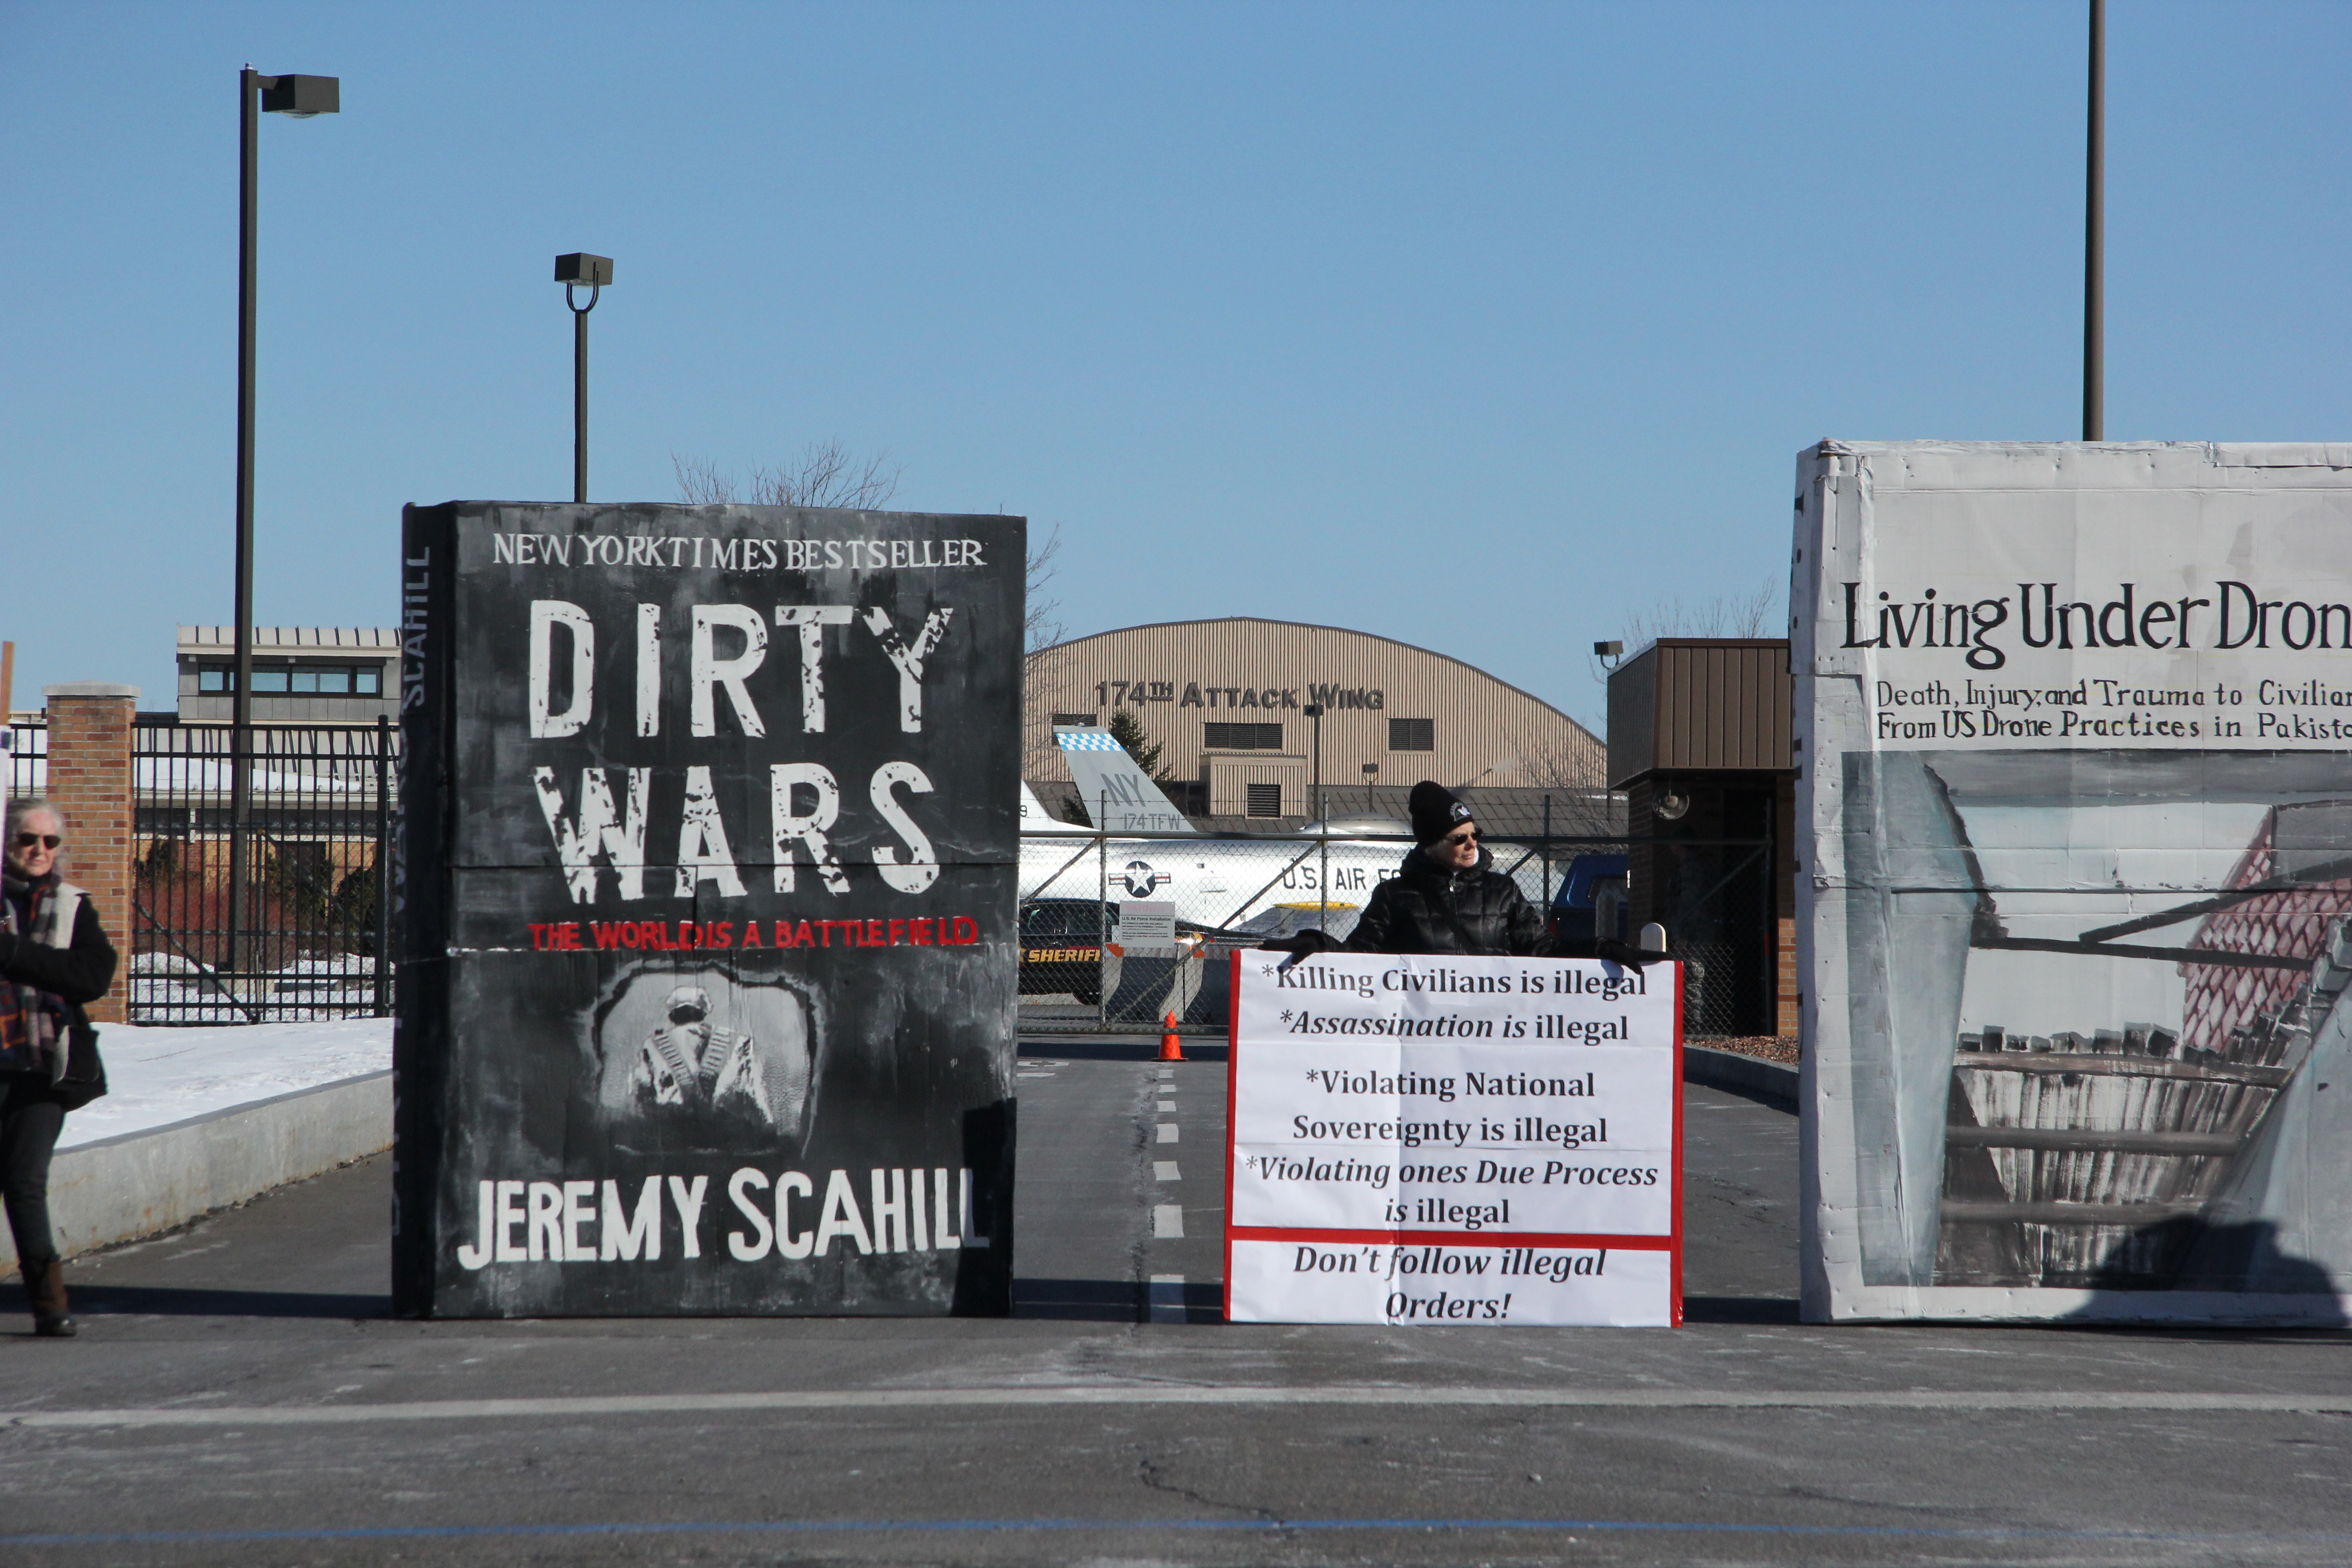 Large anti-war and anti-drone books standing in a parking lot foran anti-drone p